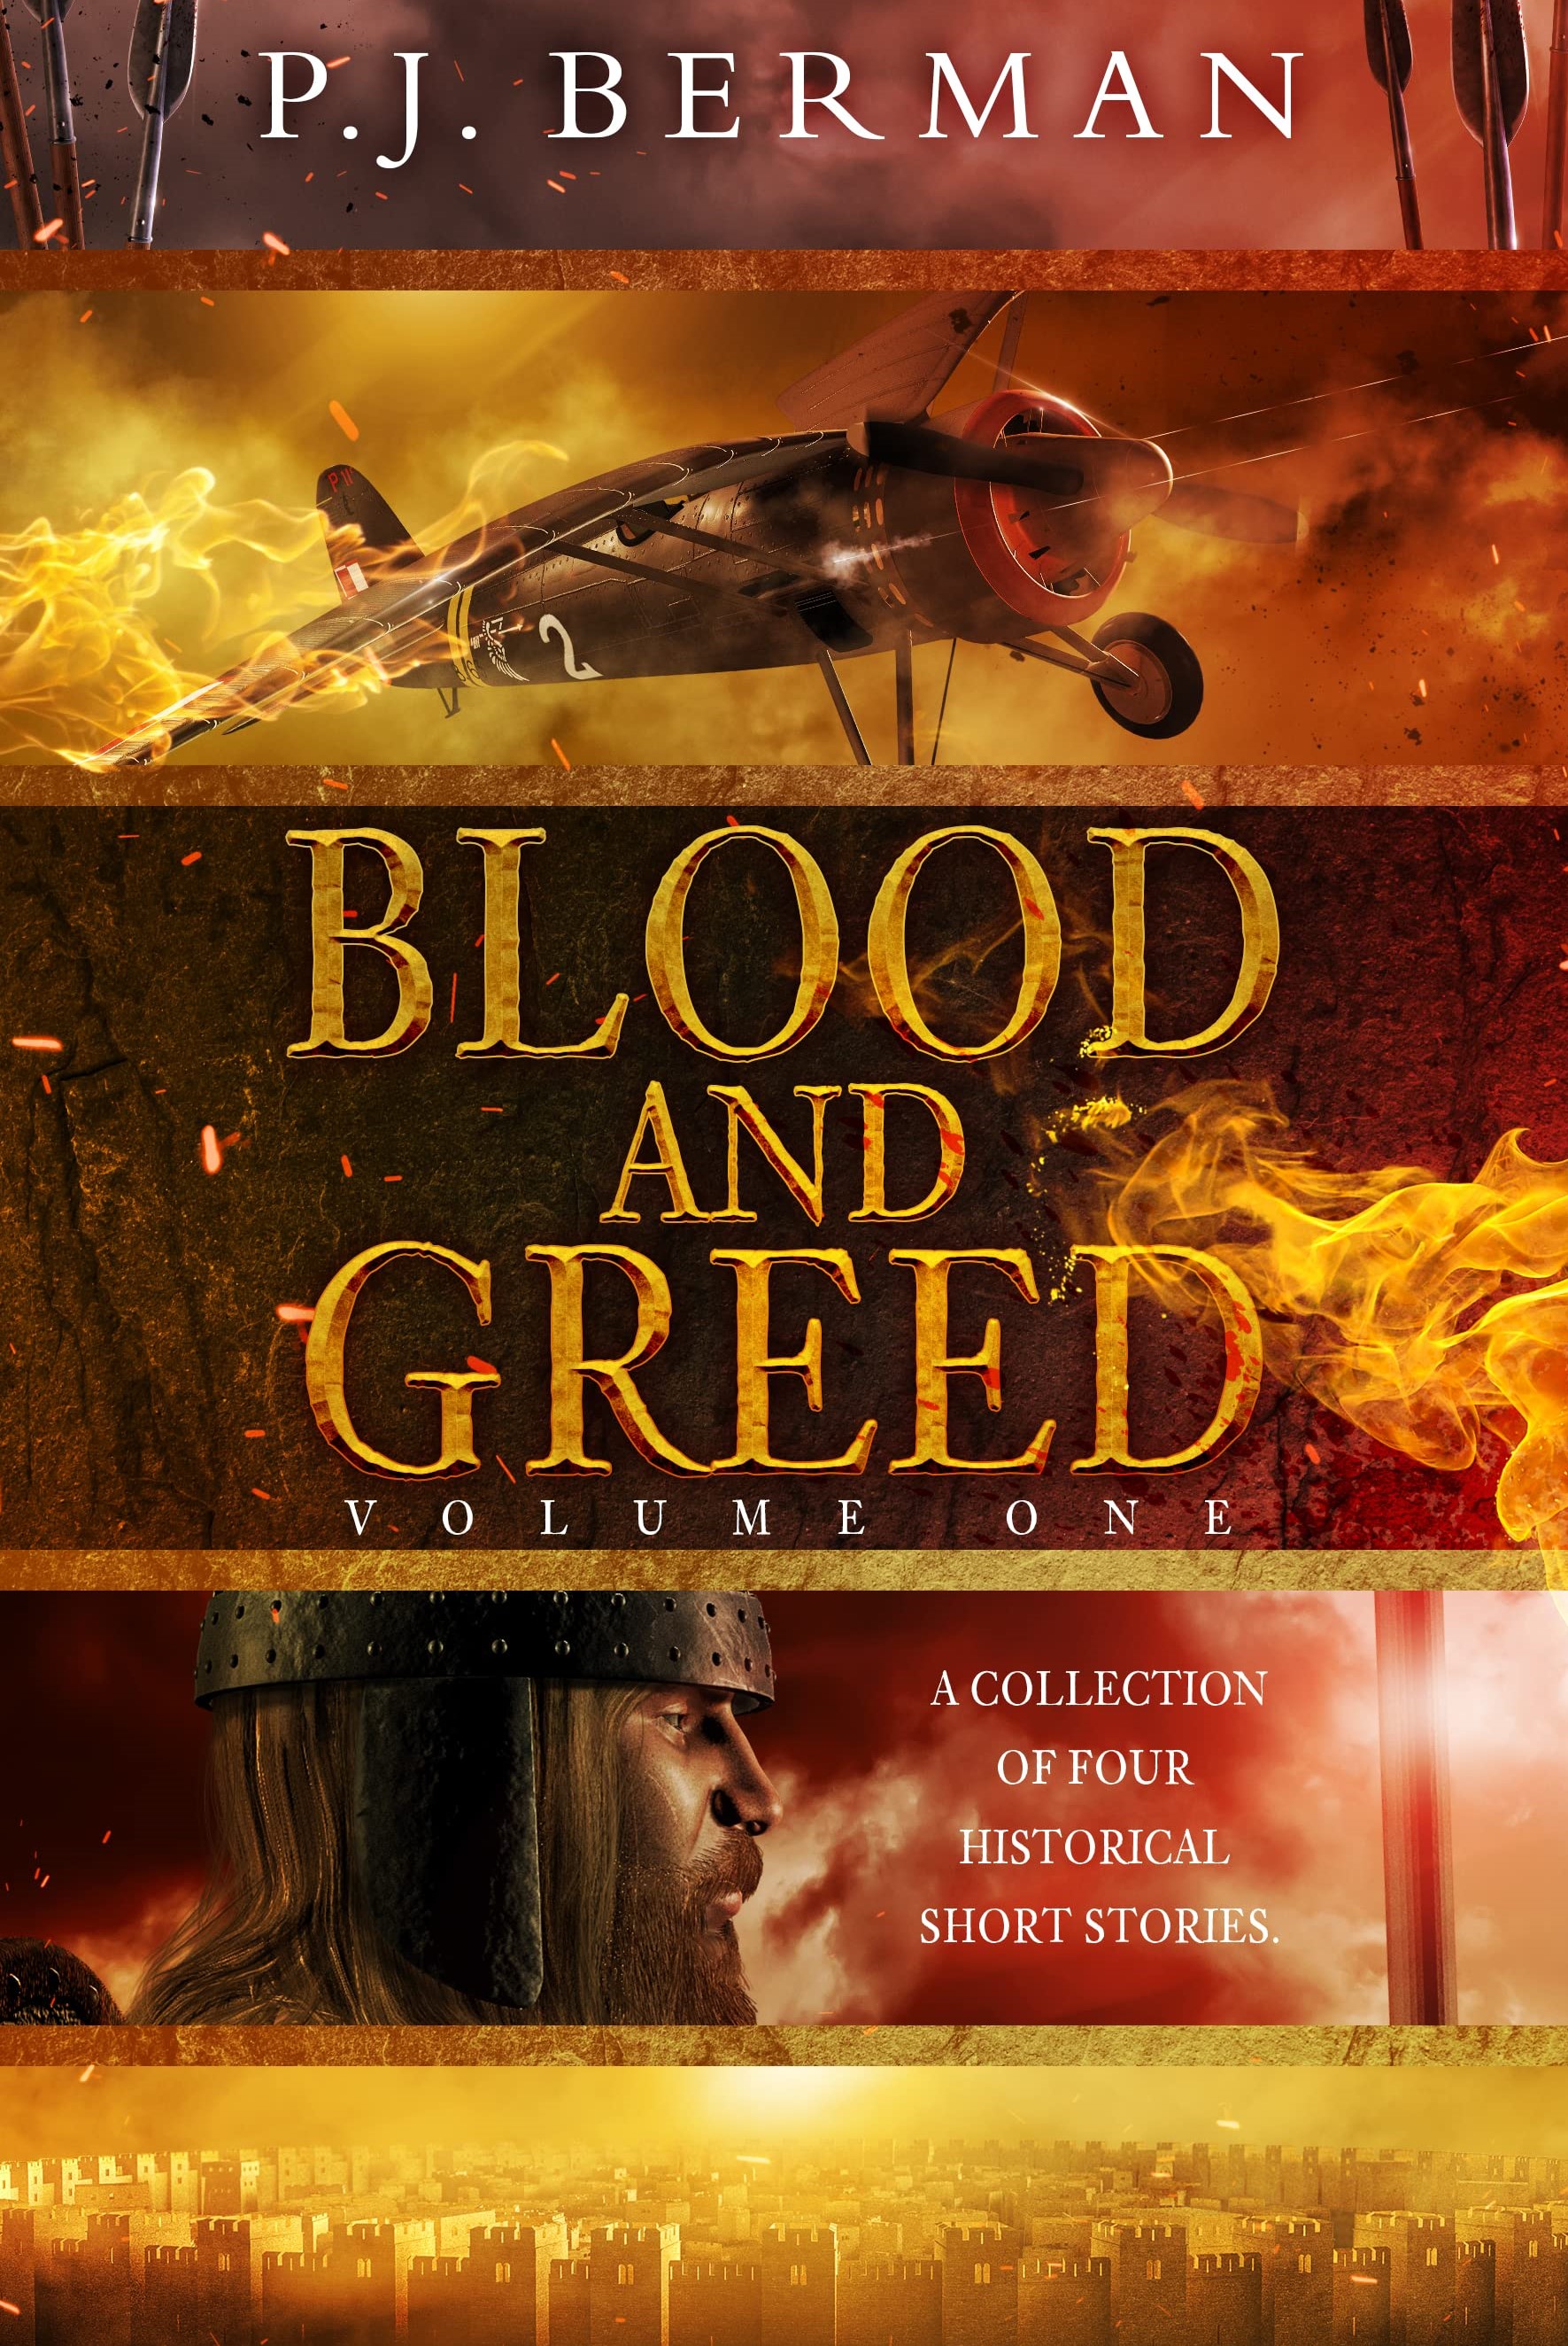 Blood and Greed (Volume 1) by P.J. Berman